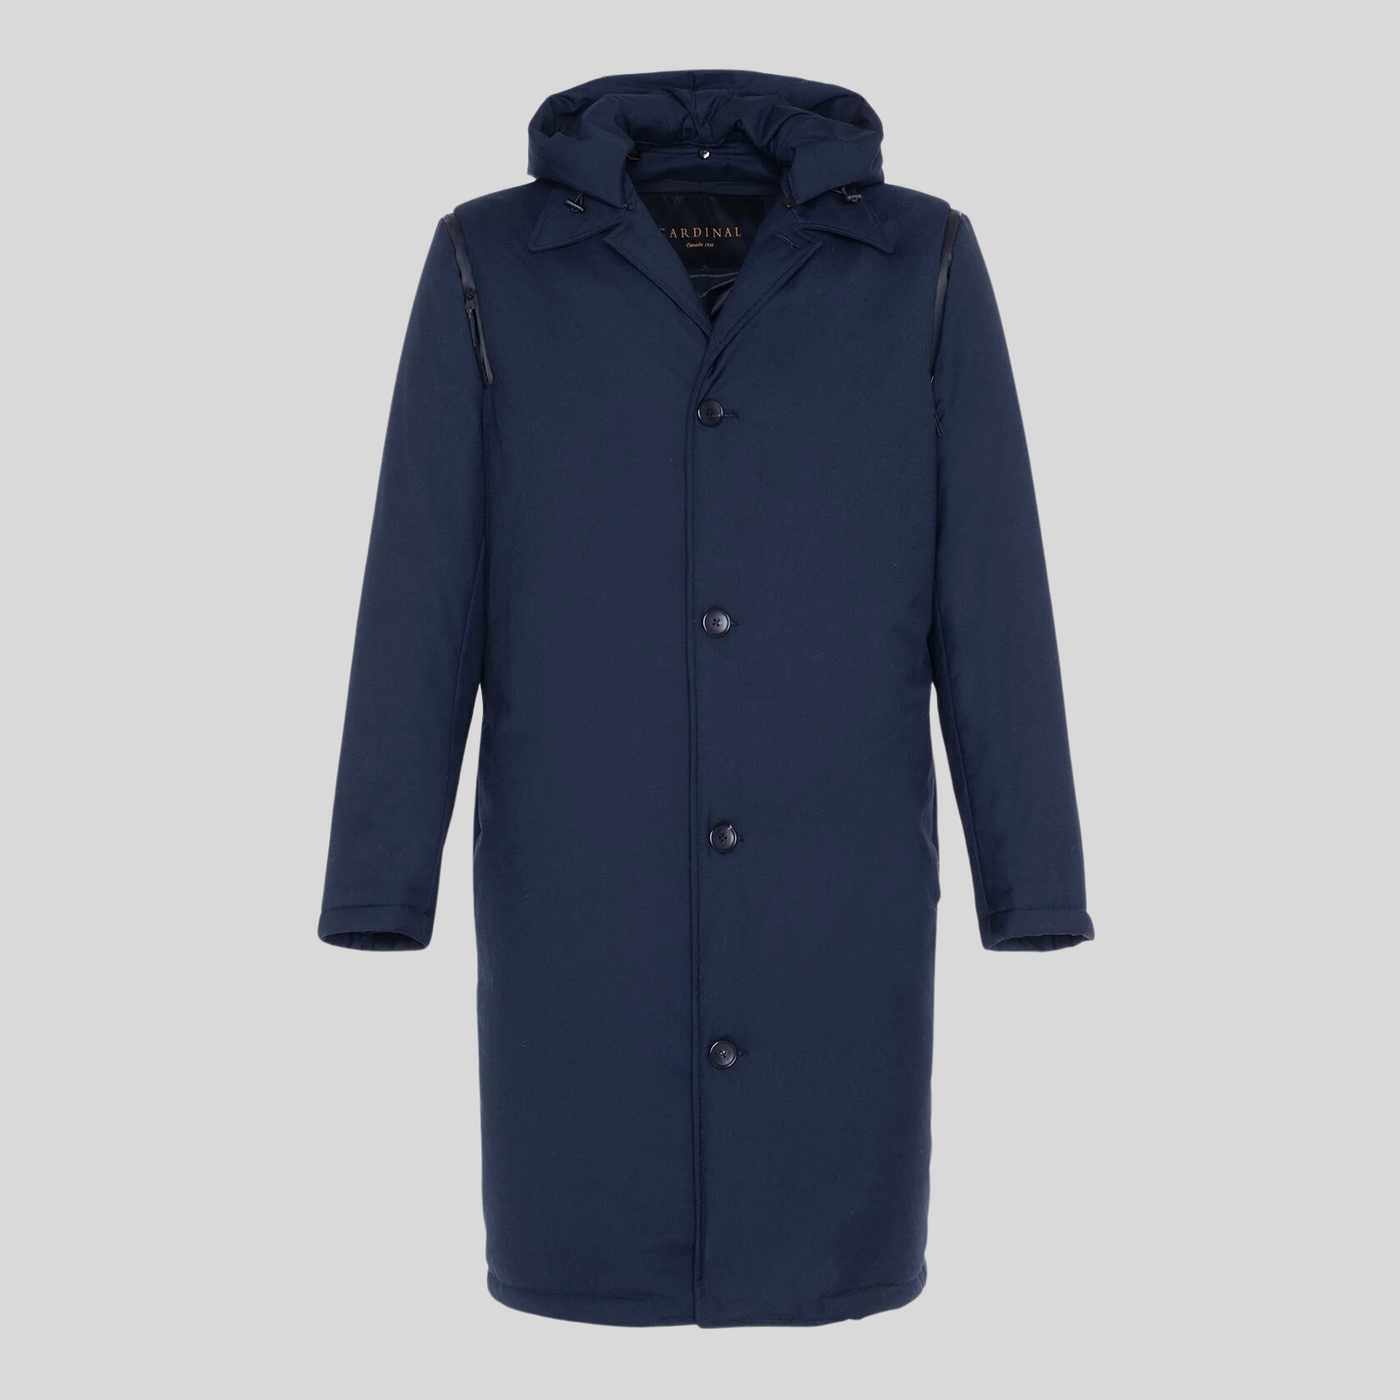 Gotstyle Fashion - Cardinal Of Canada Coats Insulated Overcoat Shoulder Zip/Removable Hood - Navy